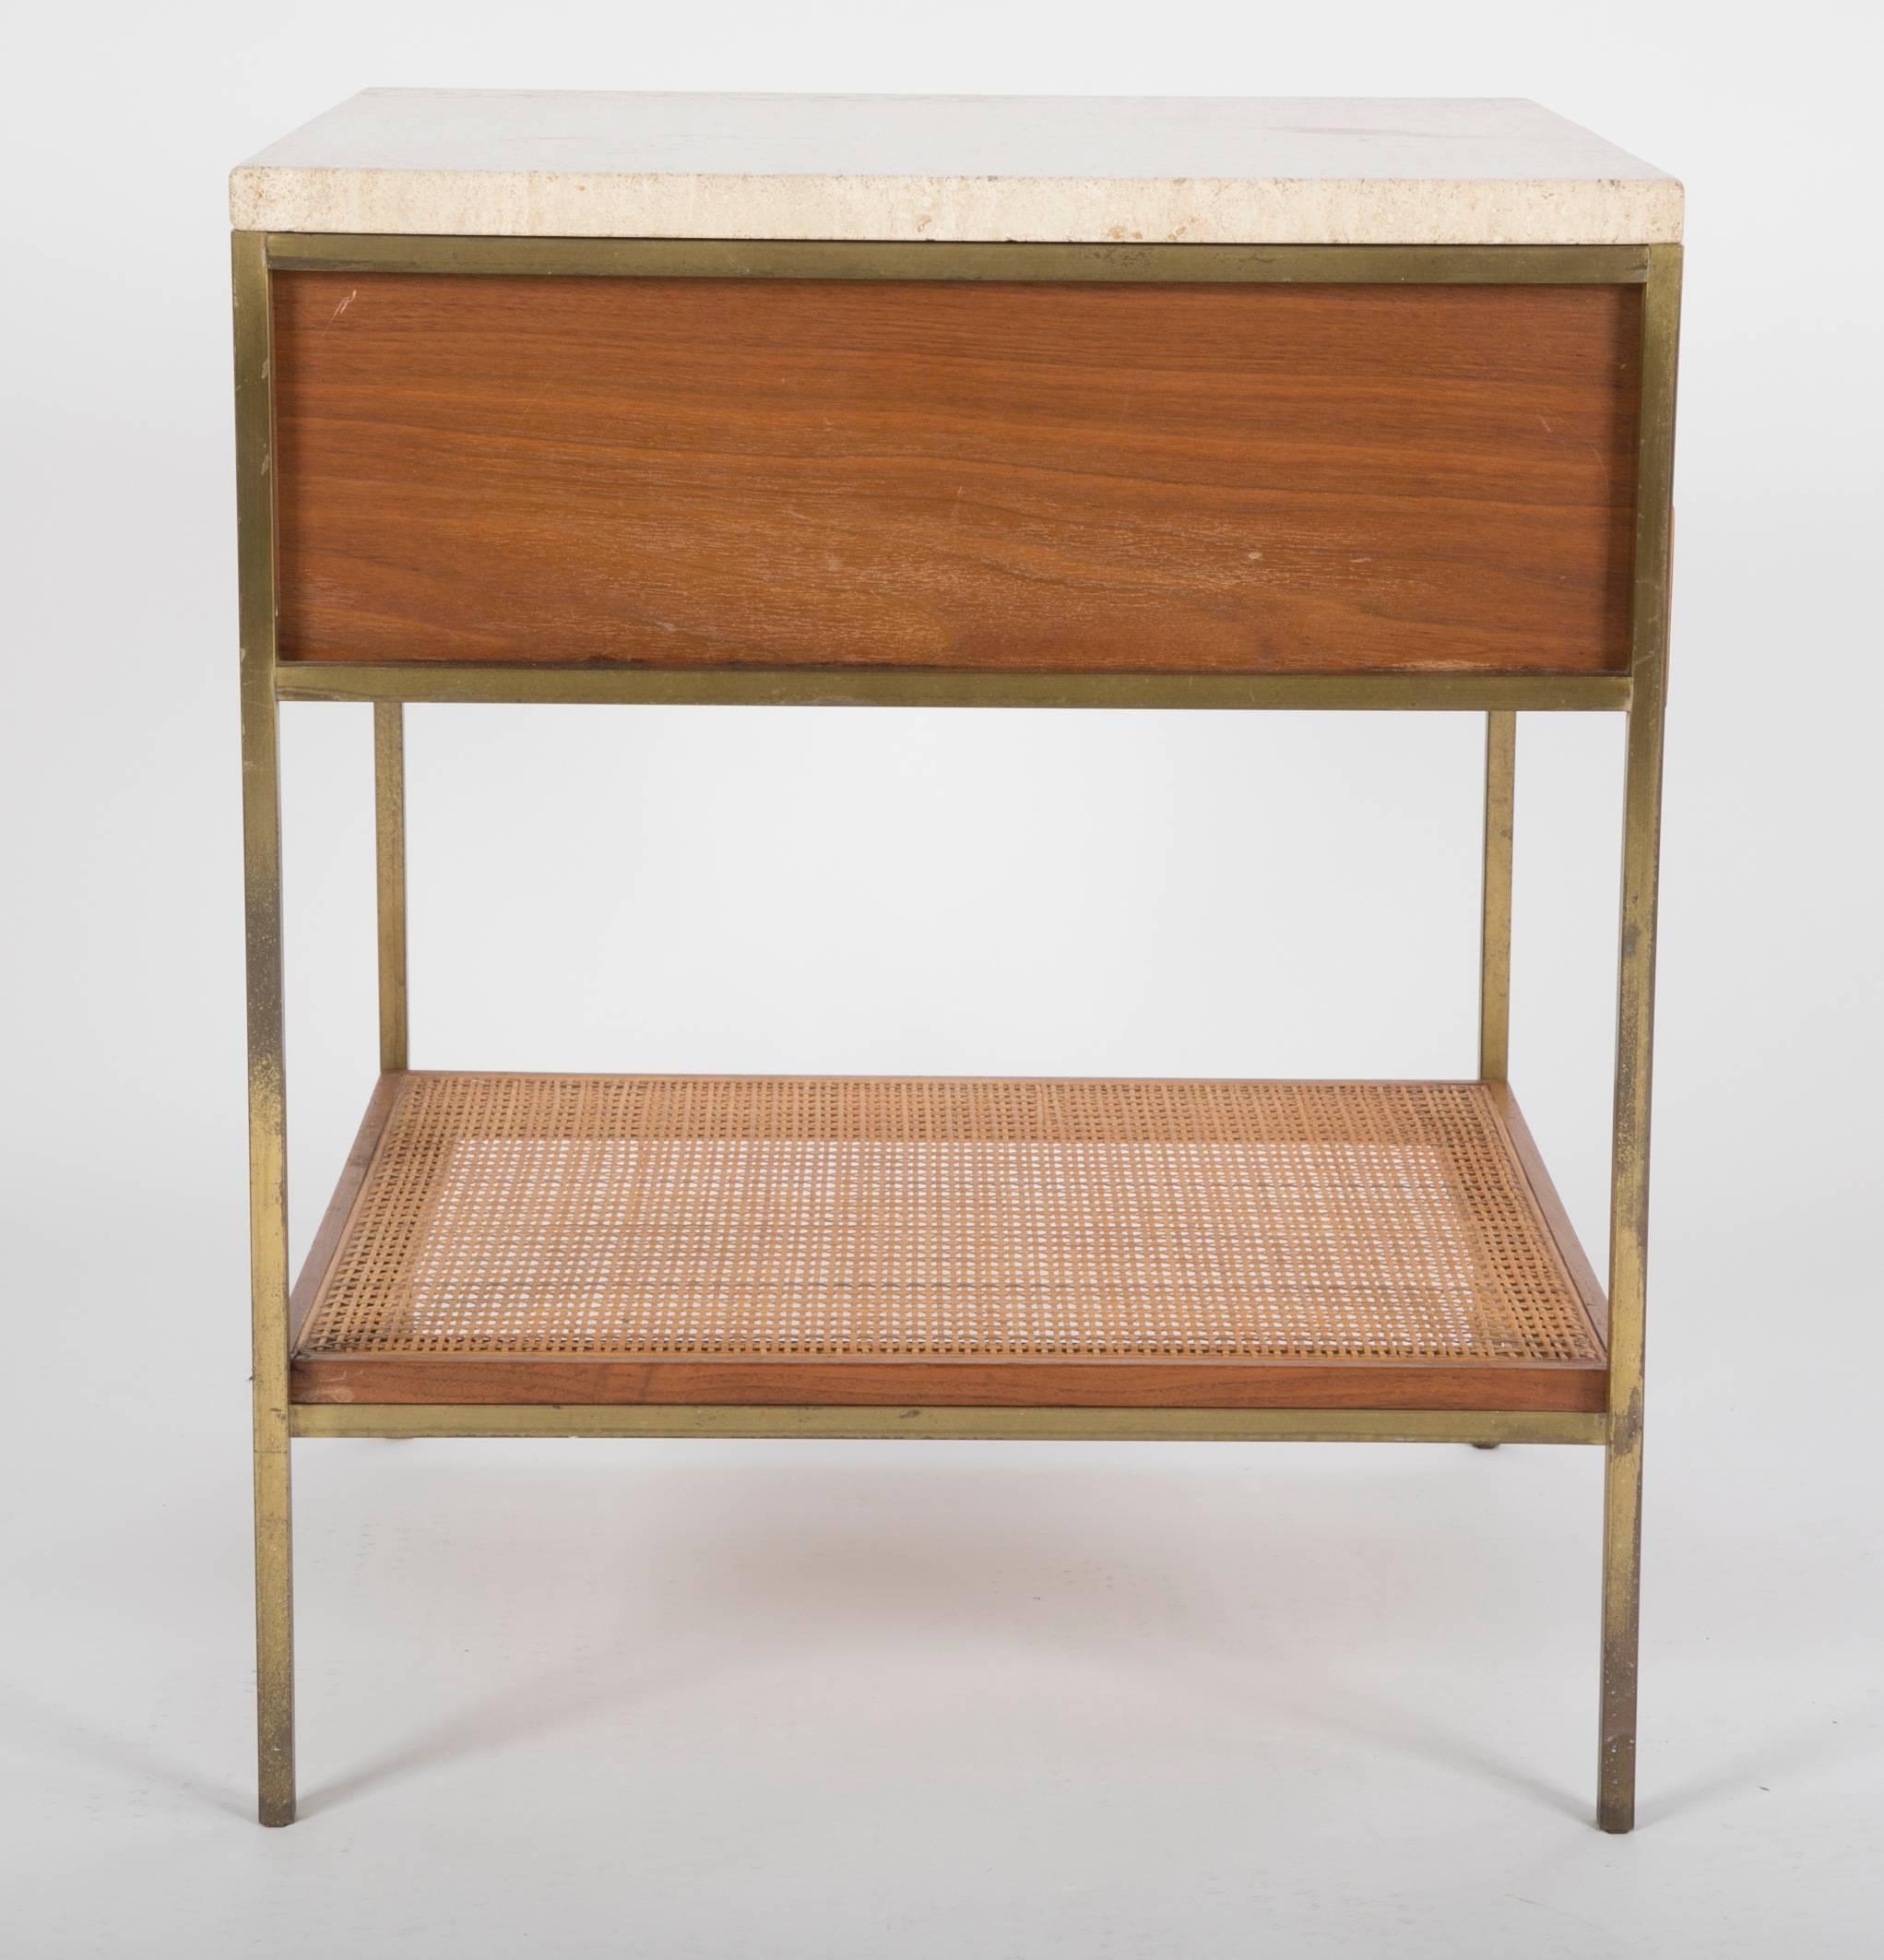 American Pair of Paul McCobb Travertine Top Side Tables with Caned Shelves